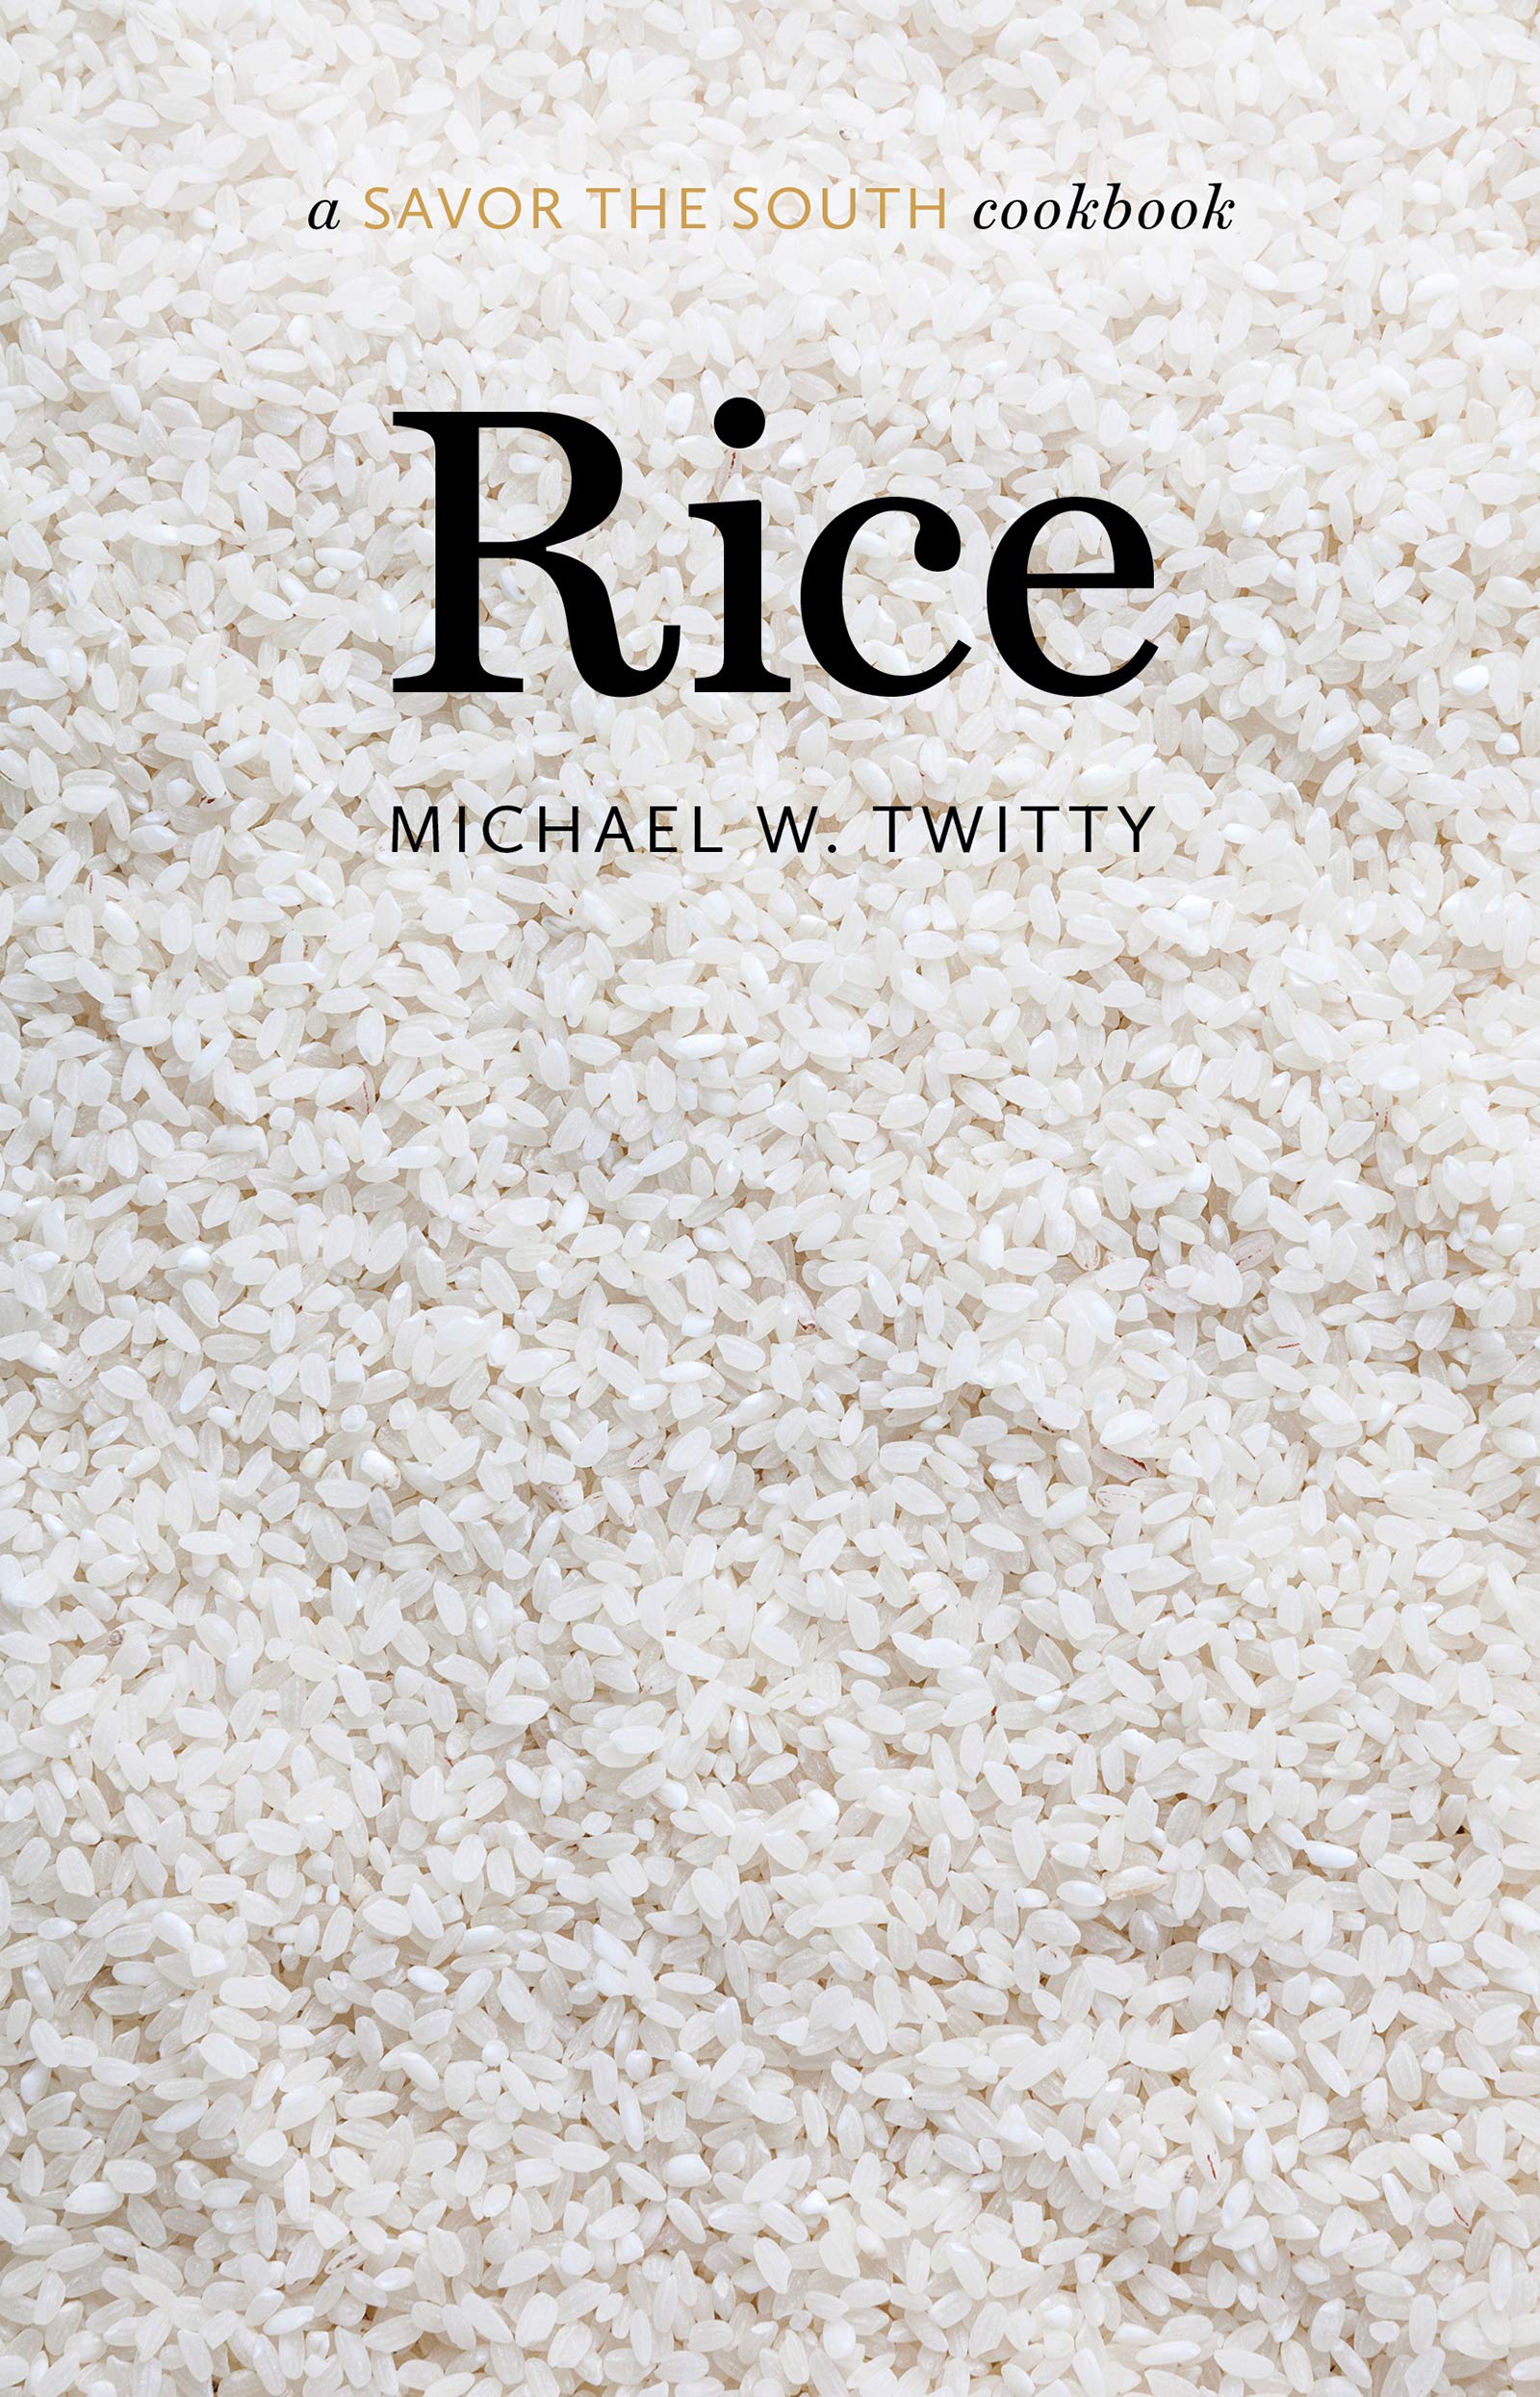 Rice: a Savor the South Cookbook (Michael W. Twitty)